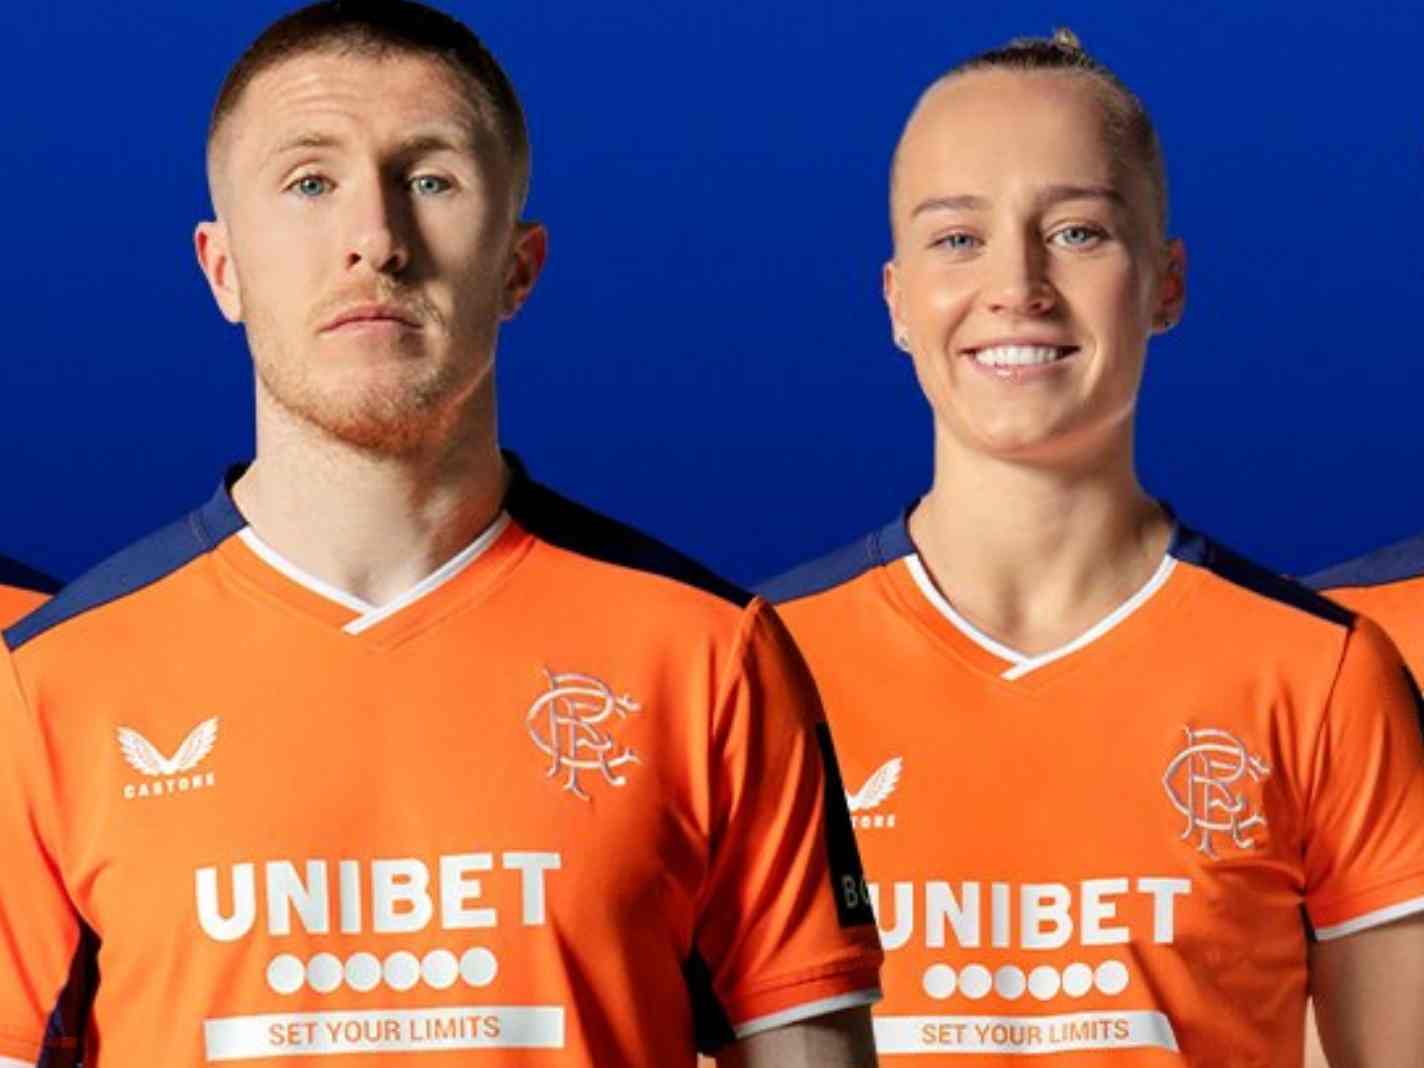 Highly awaited orange Rangers kit launches to mixed reviews